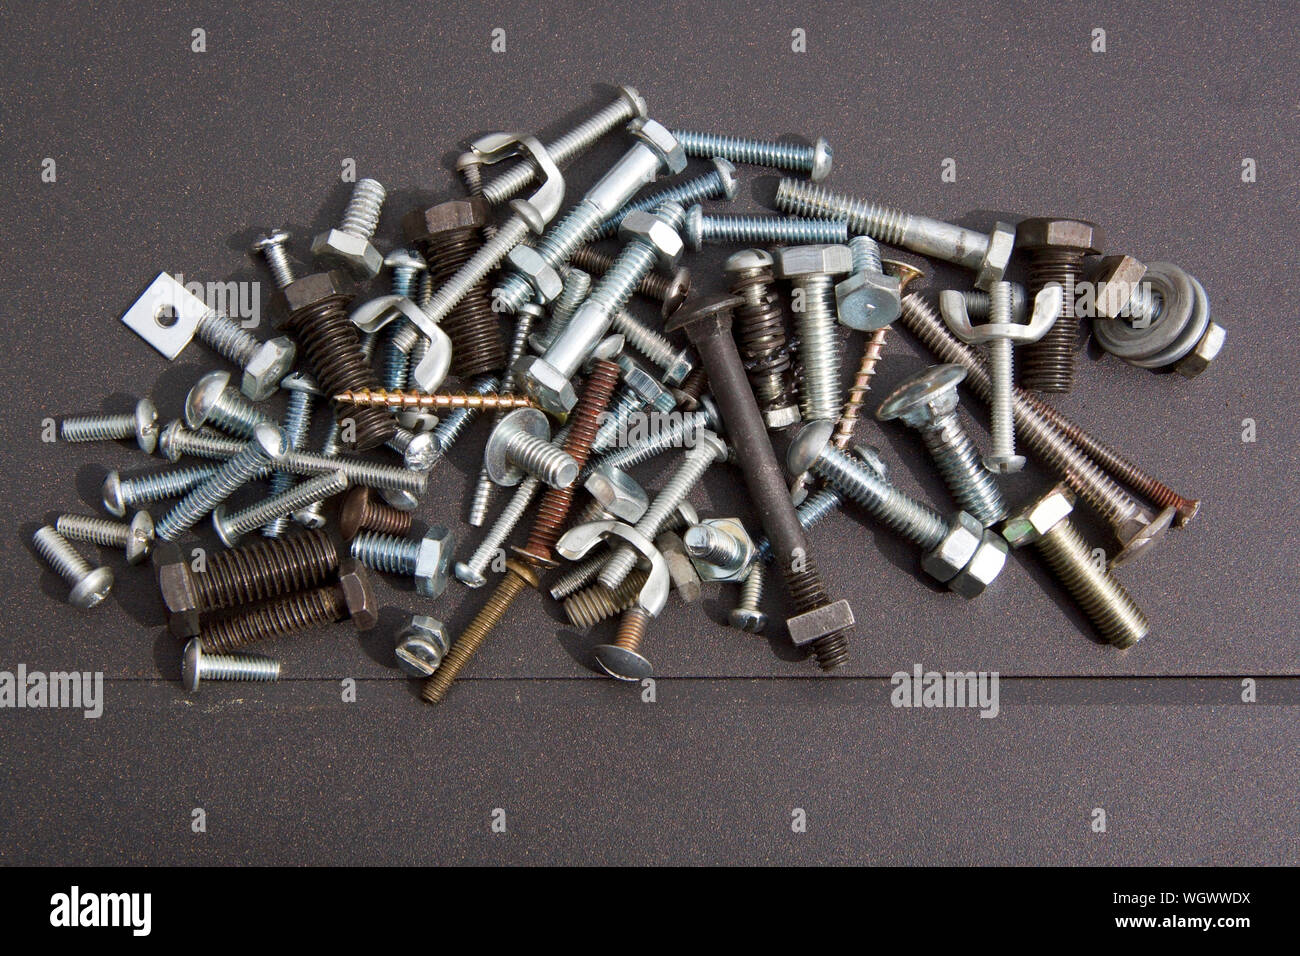 A collection of small metal bolts with a mix of nuts and an occasional screw. Stock Photo